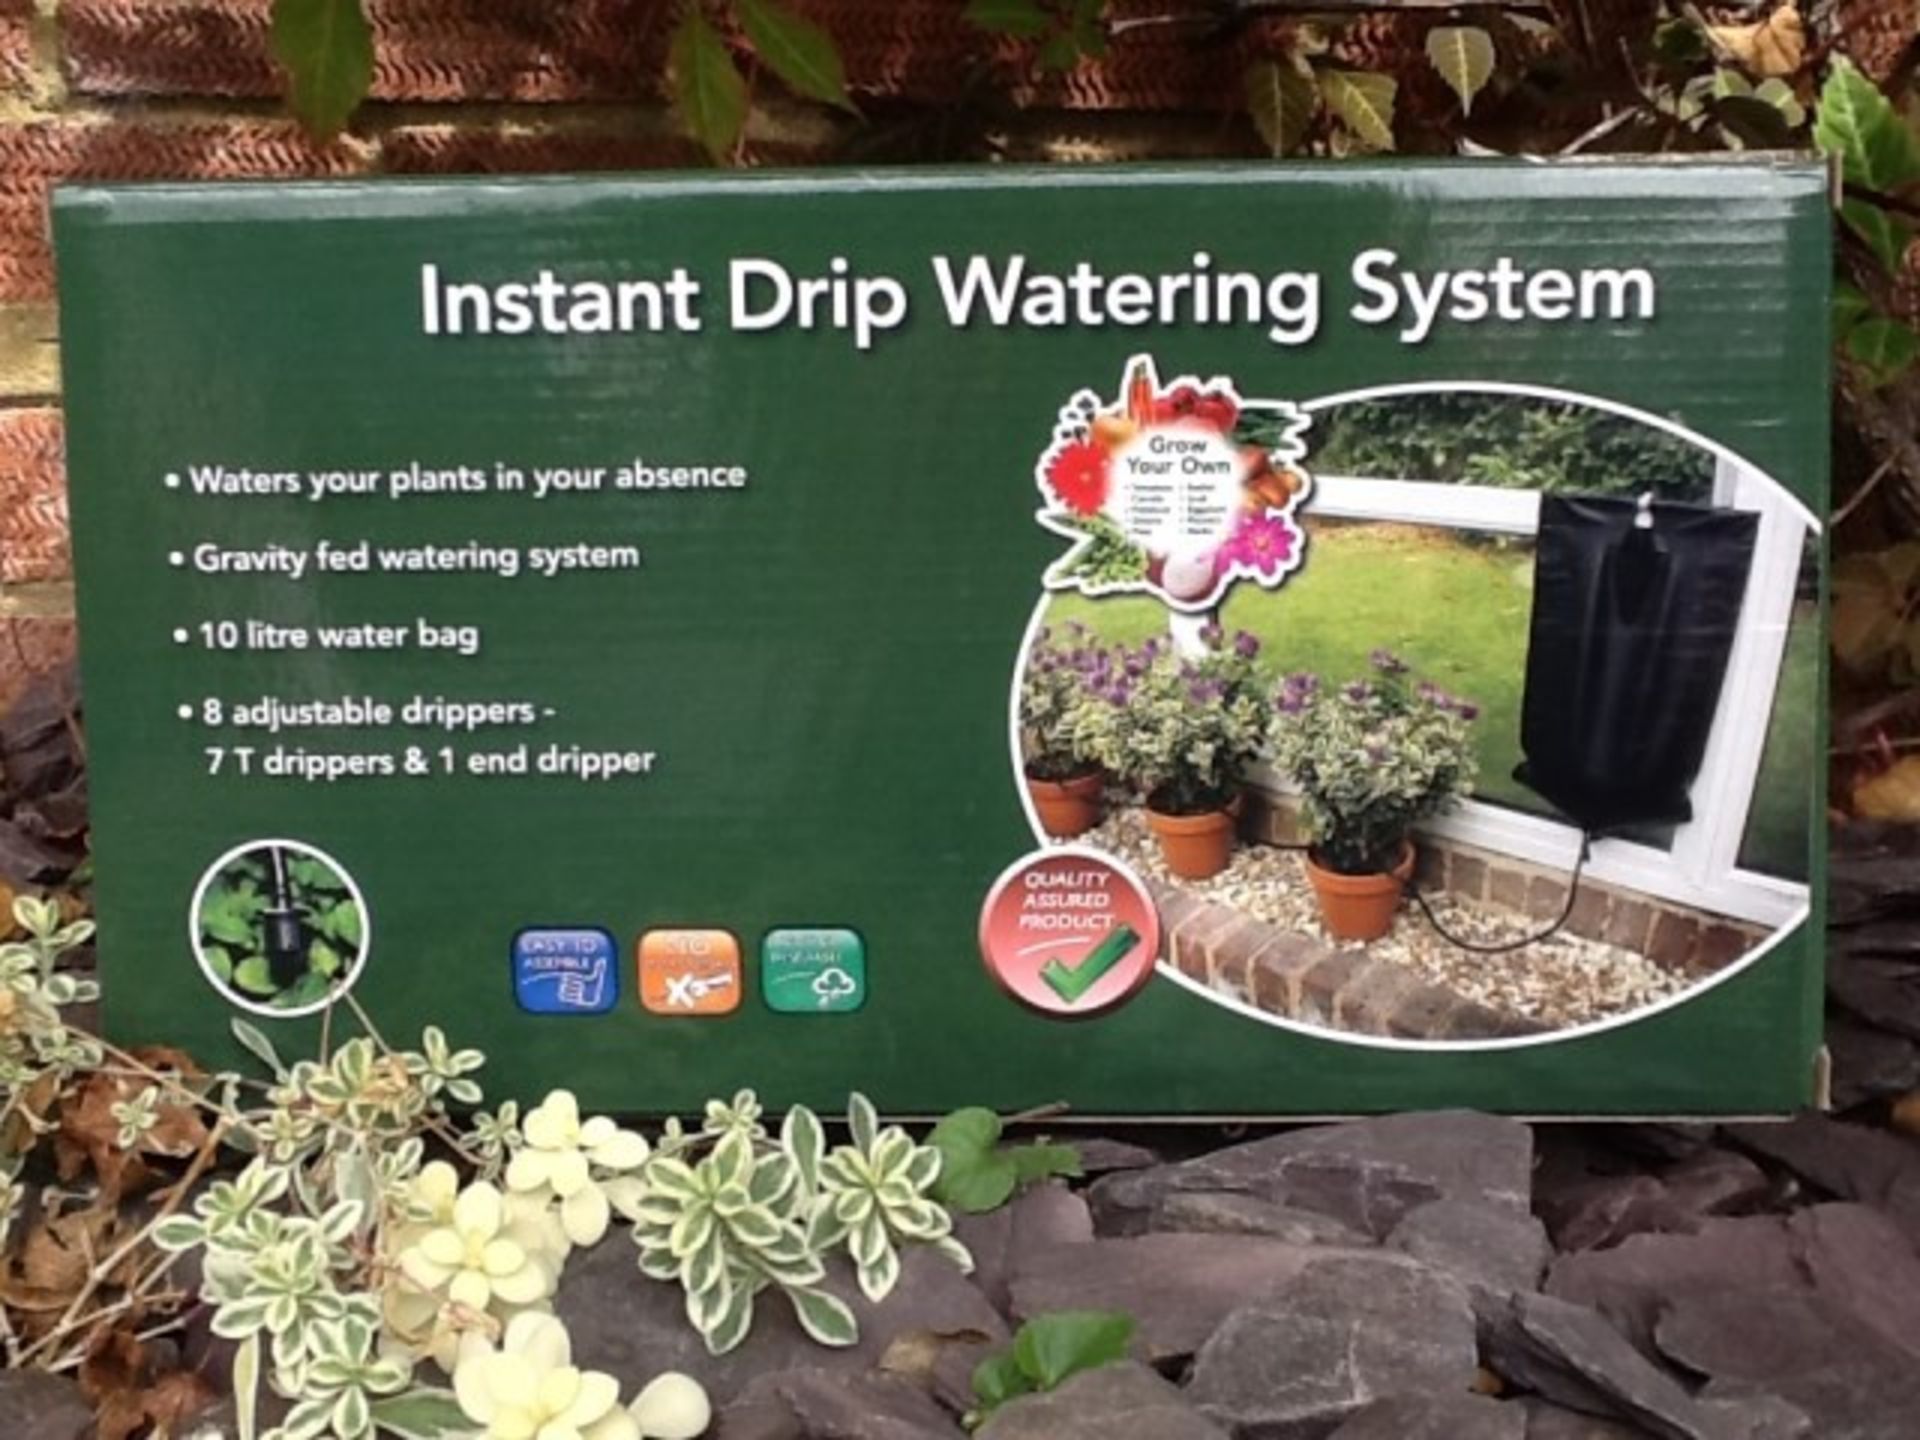 V Grade A Instant Drip Watering System With Eight Adjustable Drippers - Image 4 of 4